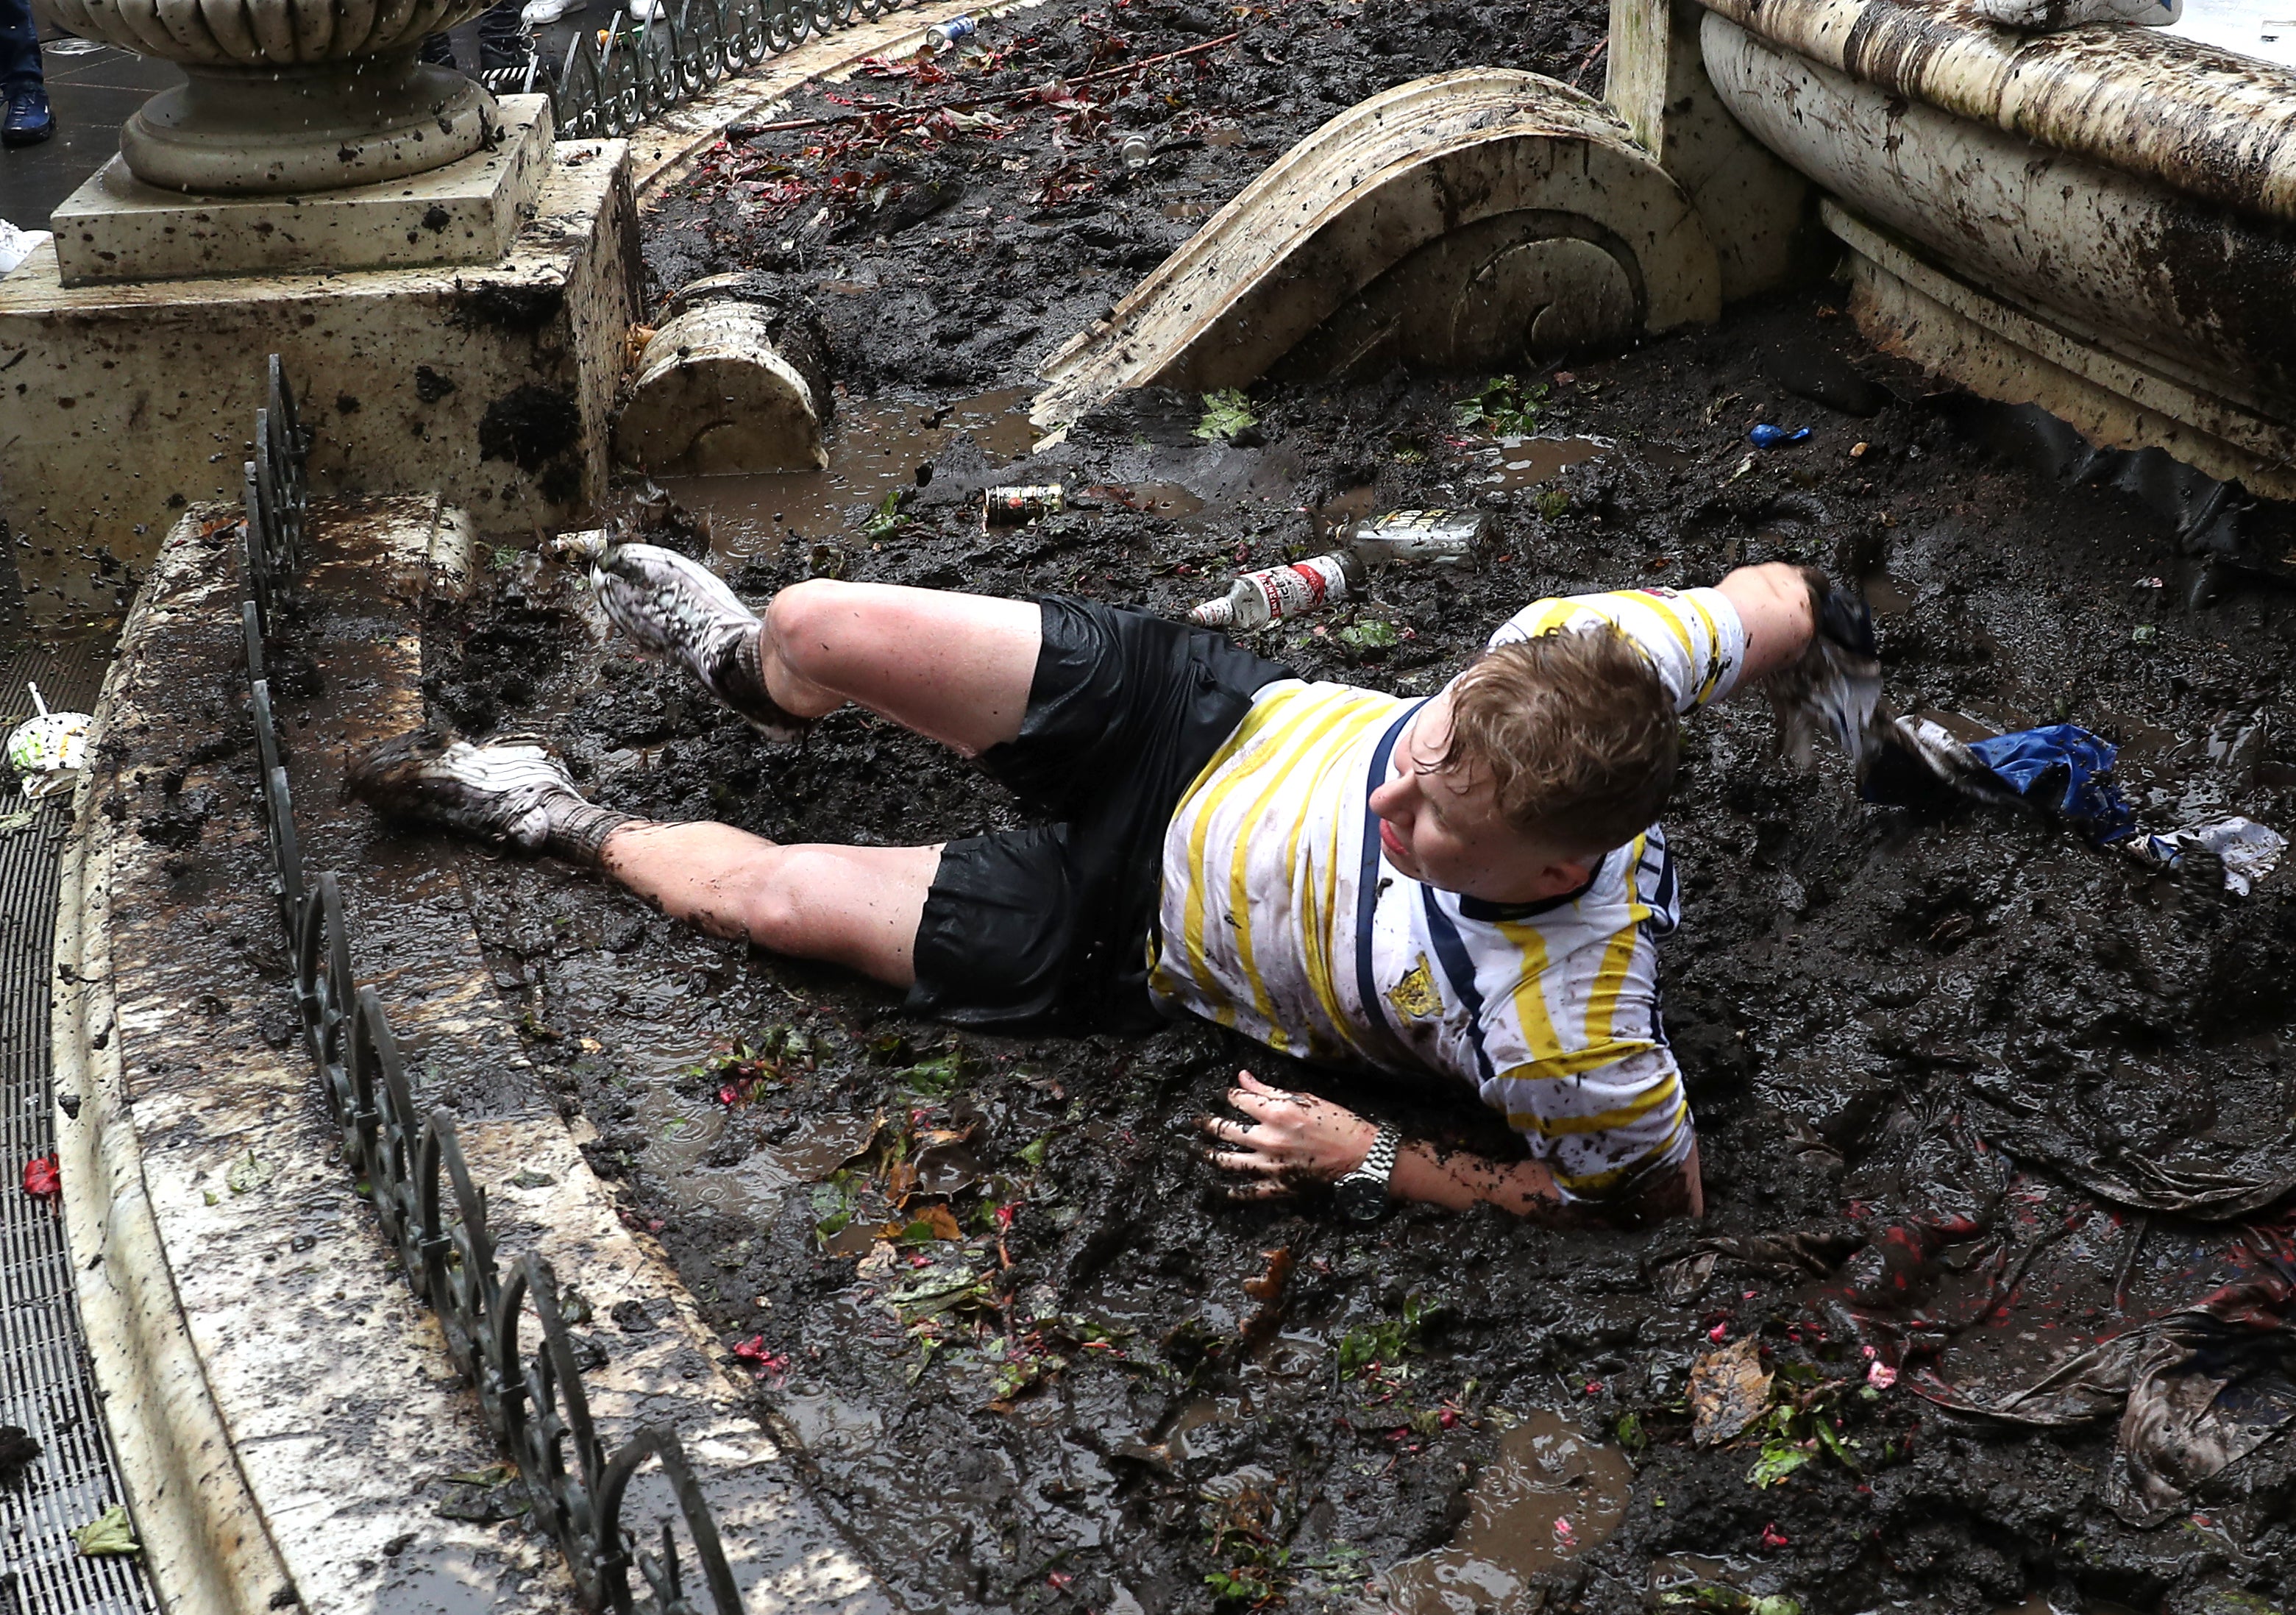 Peaked too soon? One fan was pictured rolling around in the mud.